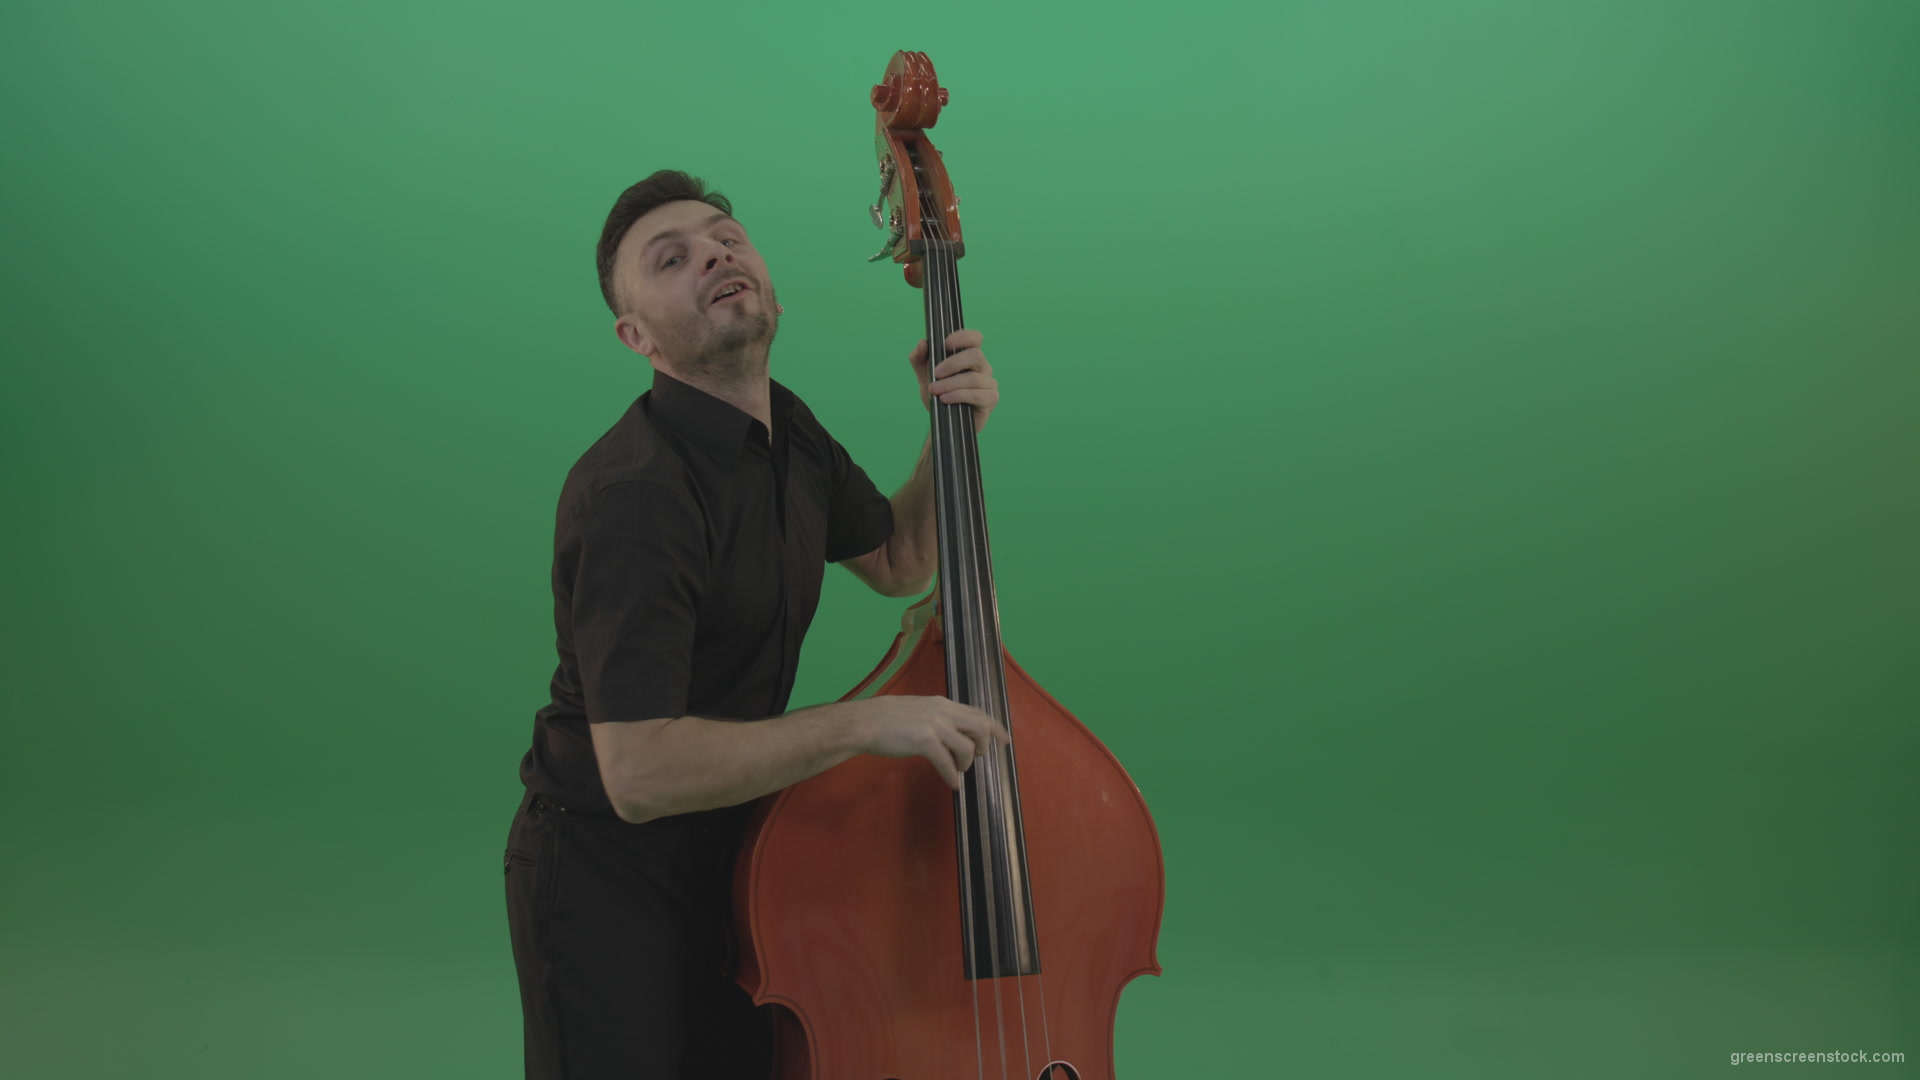 Funny-happy-man-with-smile-playing-jazz-on-double-bass-String-music-instrument-isolated-on-green-screen_009 Green Screen Stock